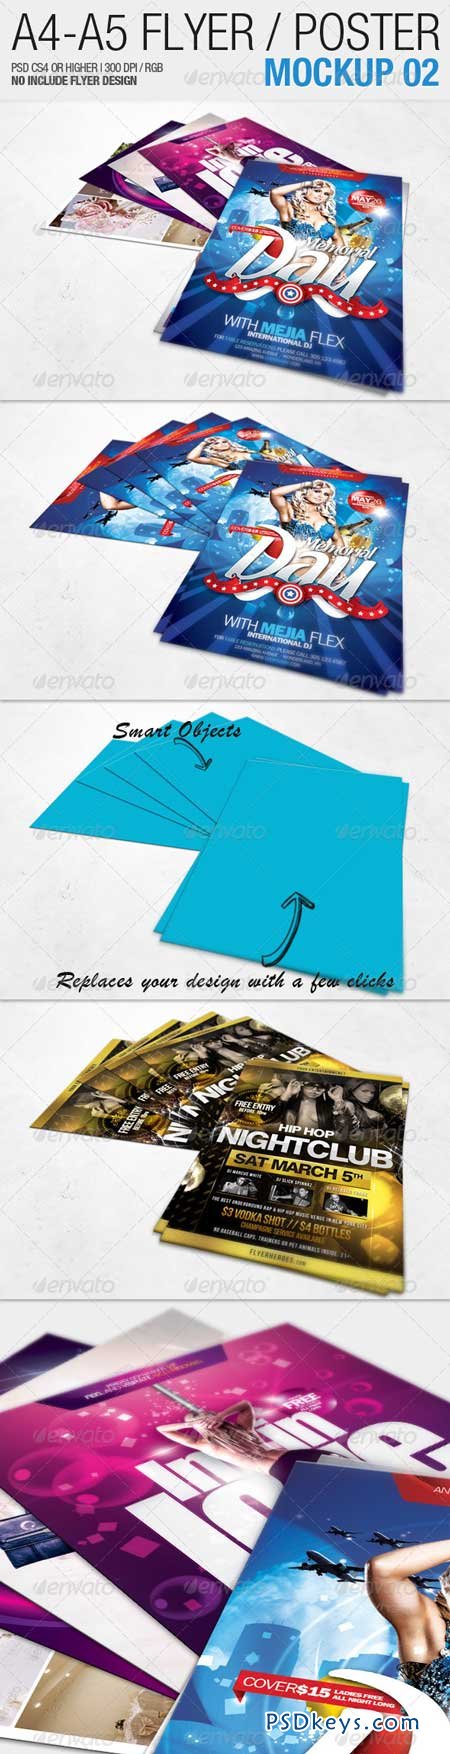 Download Articles For 29 10 2014 Free Download Photoshop Vector Stock Image Via Torrent Zippyshare From Psdkeys Com PSD Mockup Templates